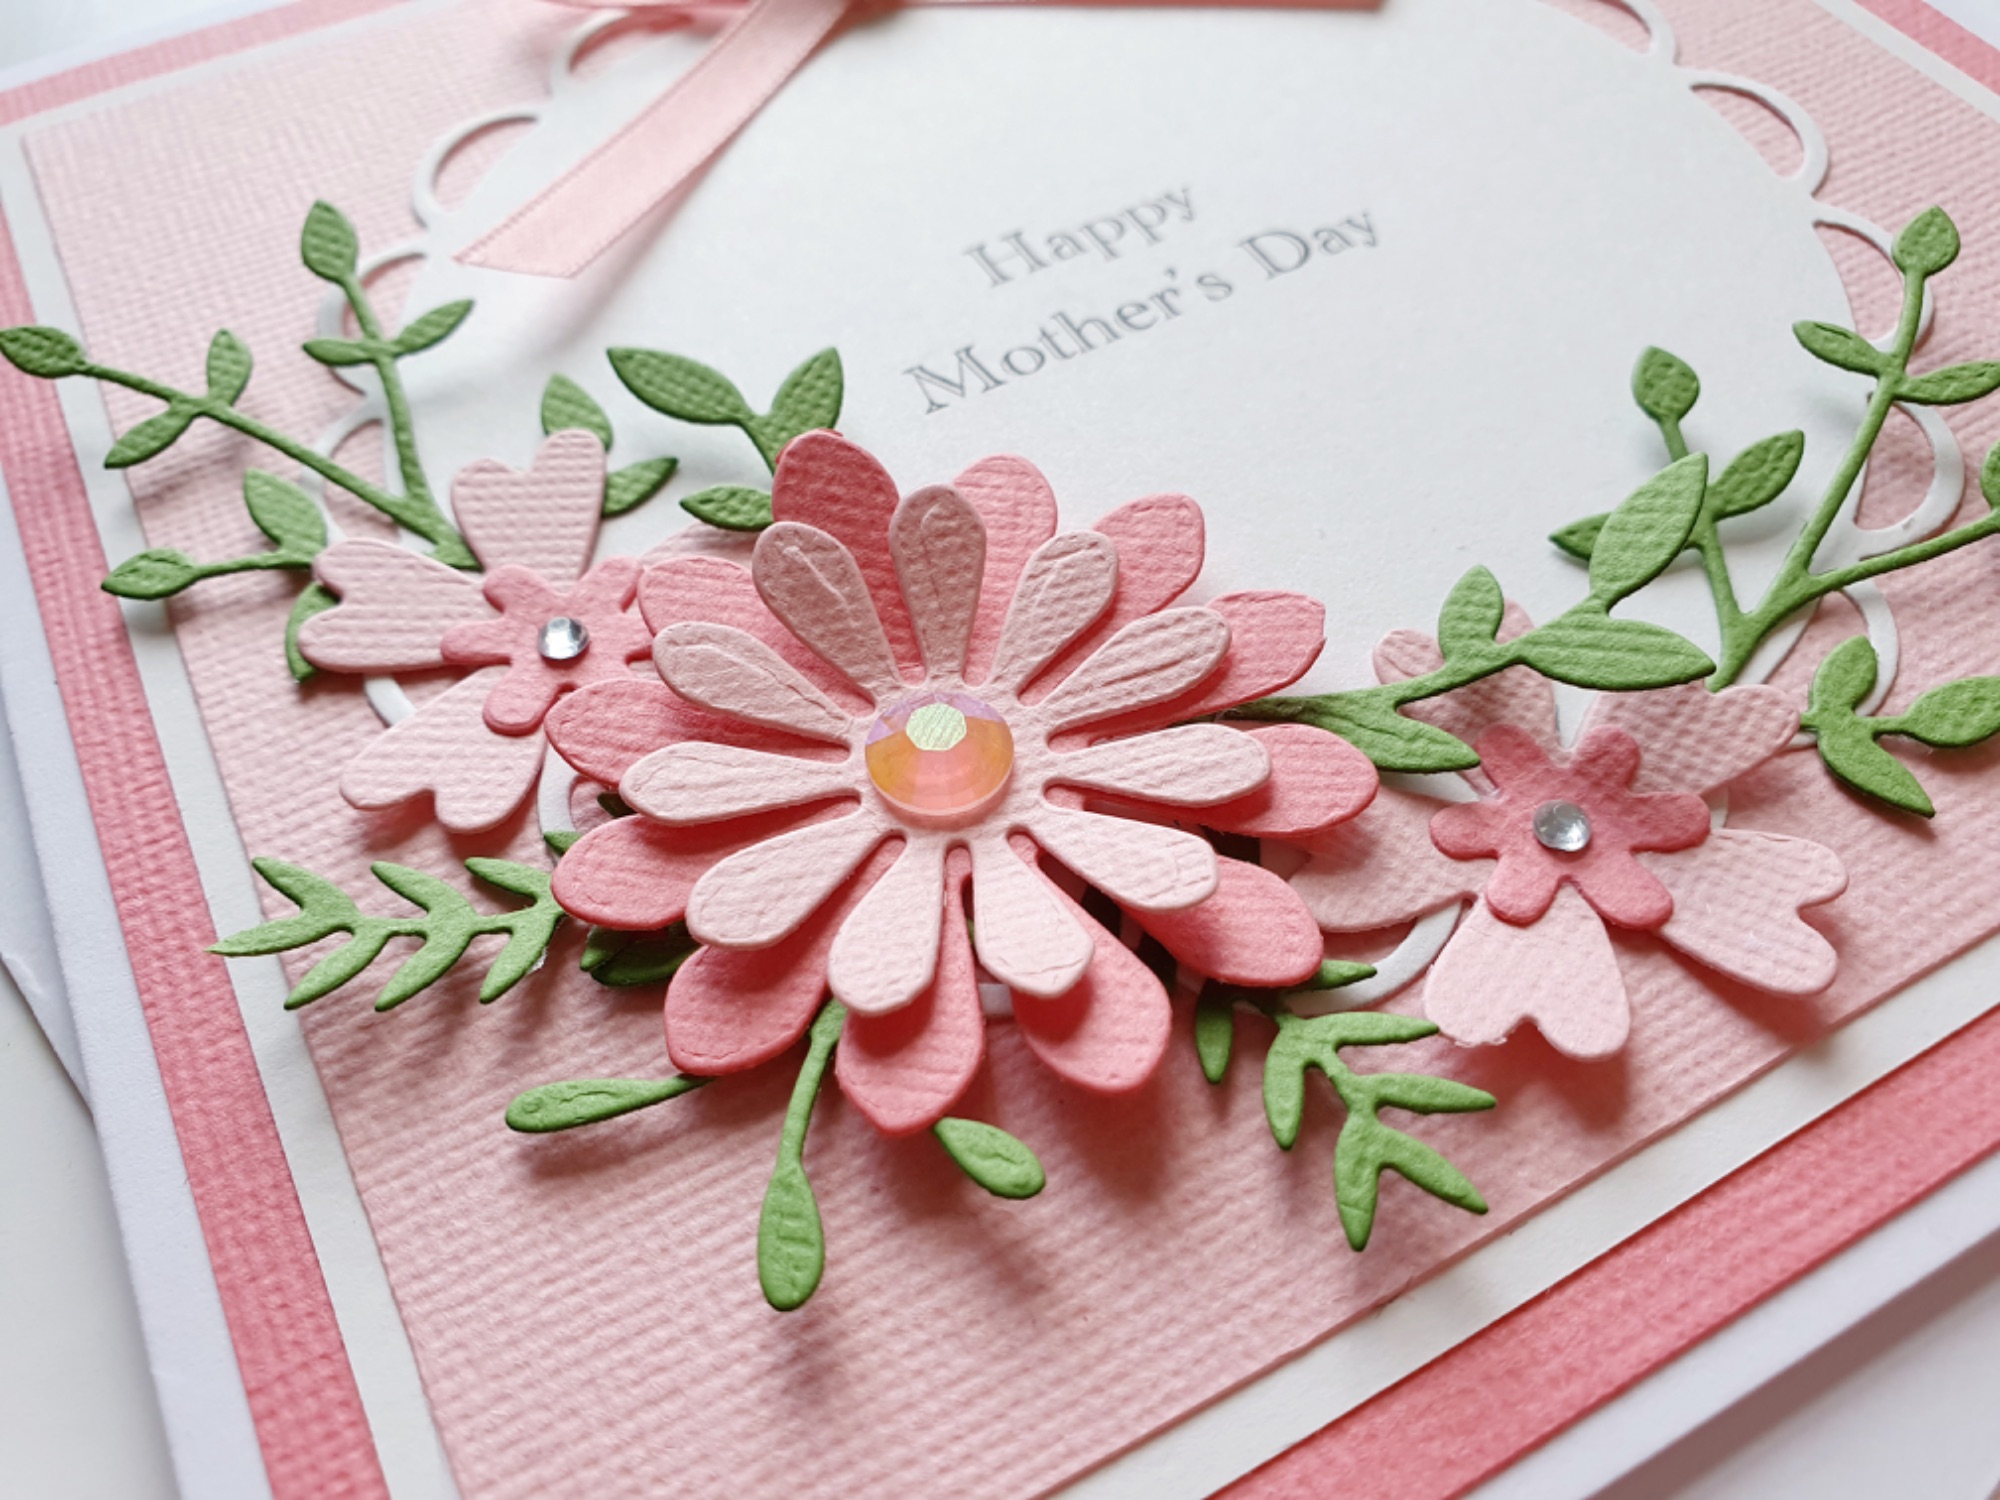 Handmade Floral Mother's Day Card with flowers and gems